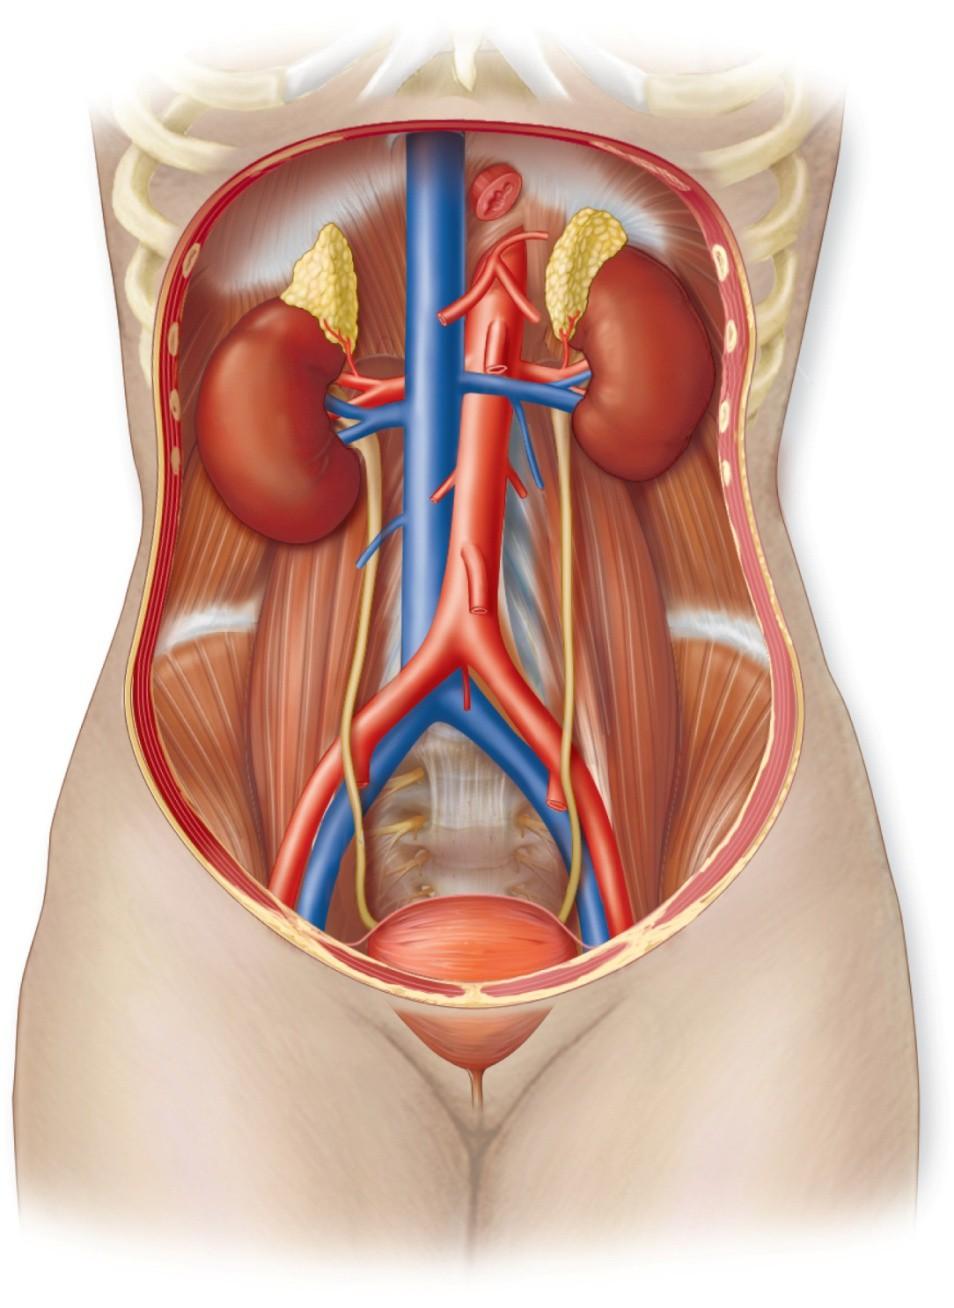 Overview of the urinary system.copyright The McGraw-Hill Companies, Inc.